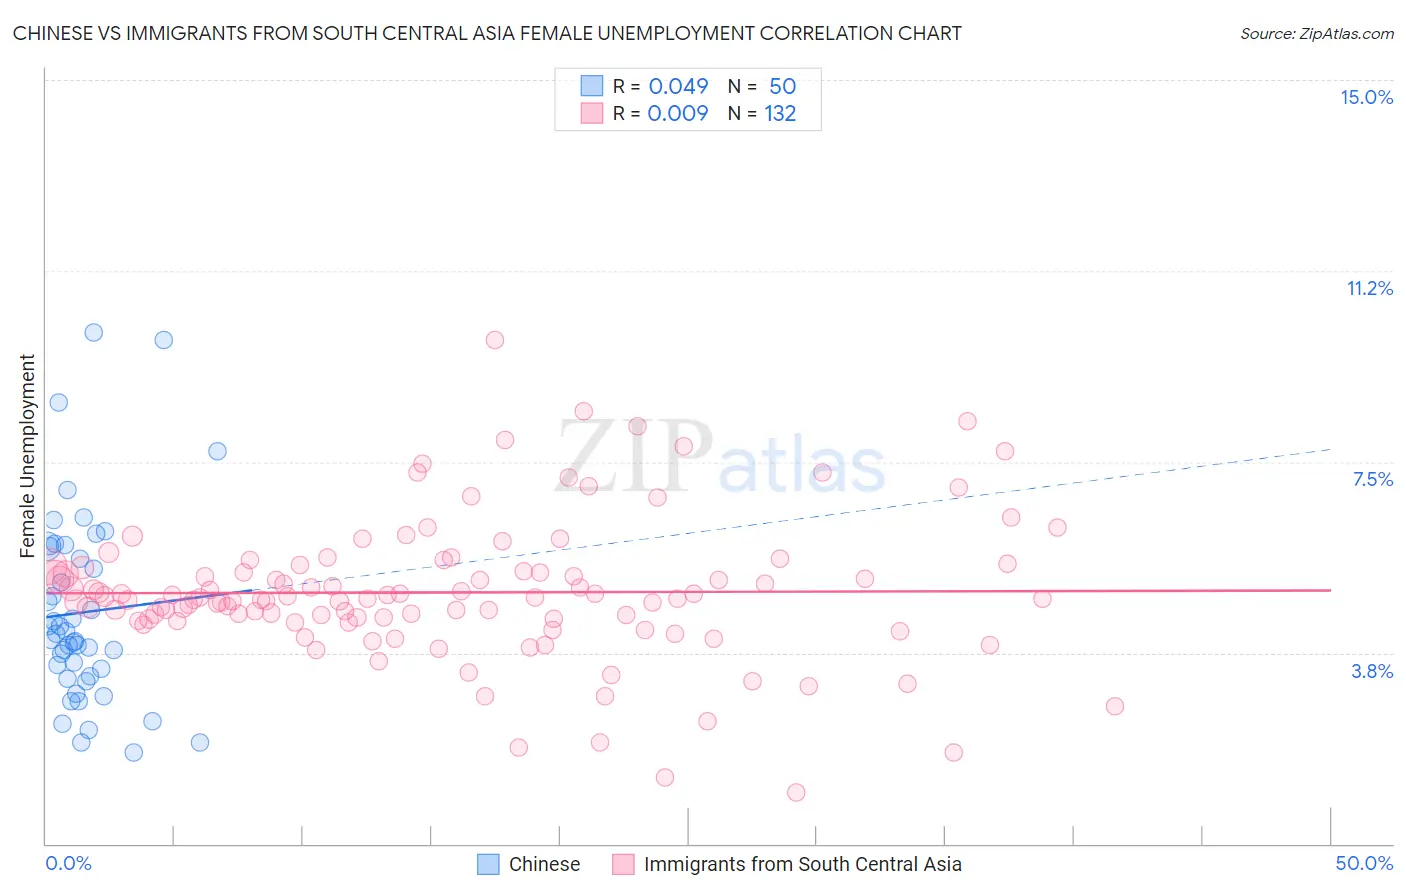 Chinese vs Immigrants from South Central Asia Female Unemployment